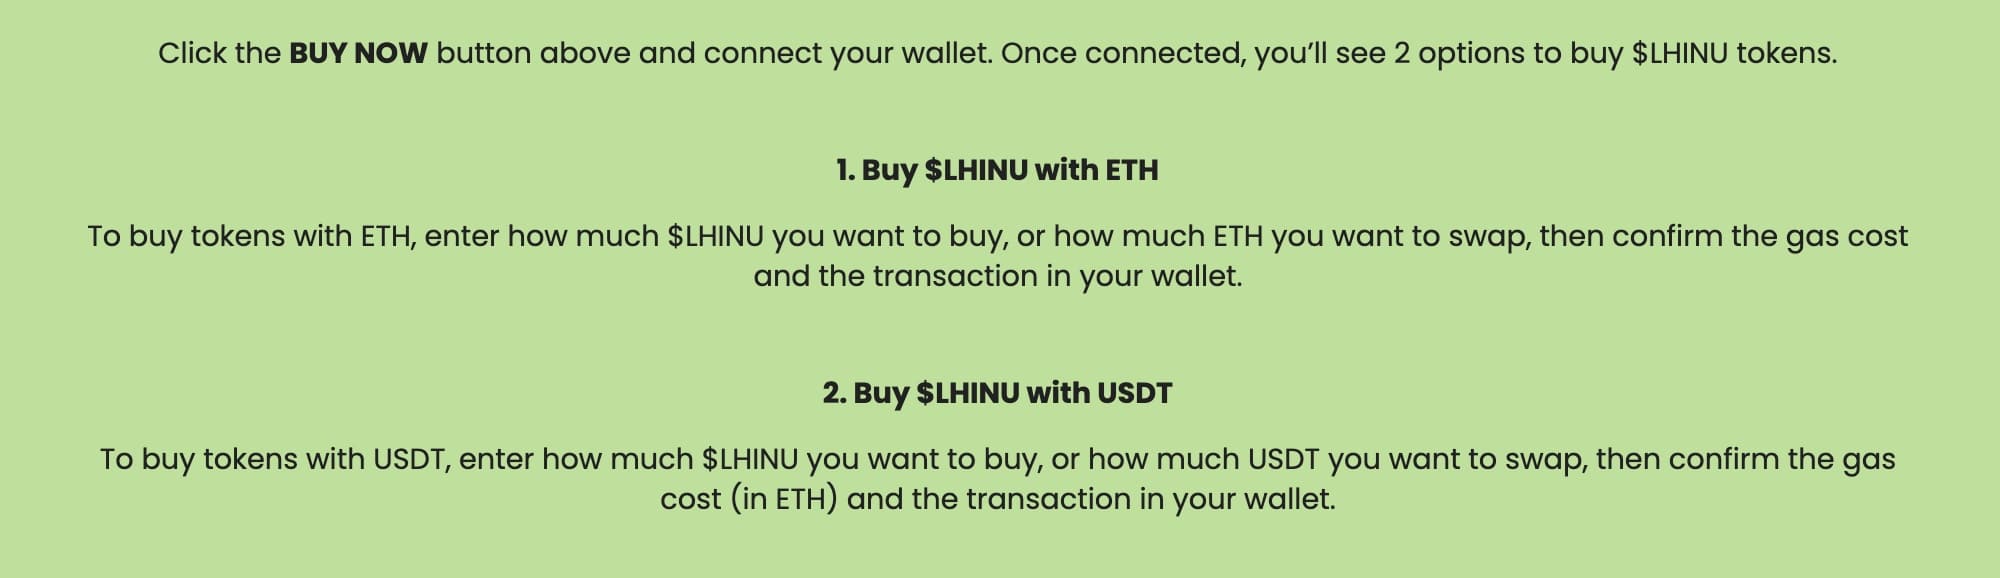 Buy Love Hate Inu with ETH